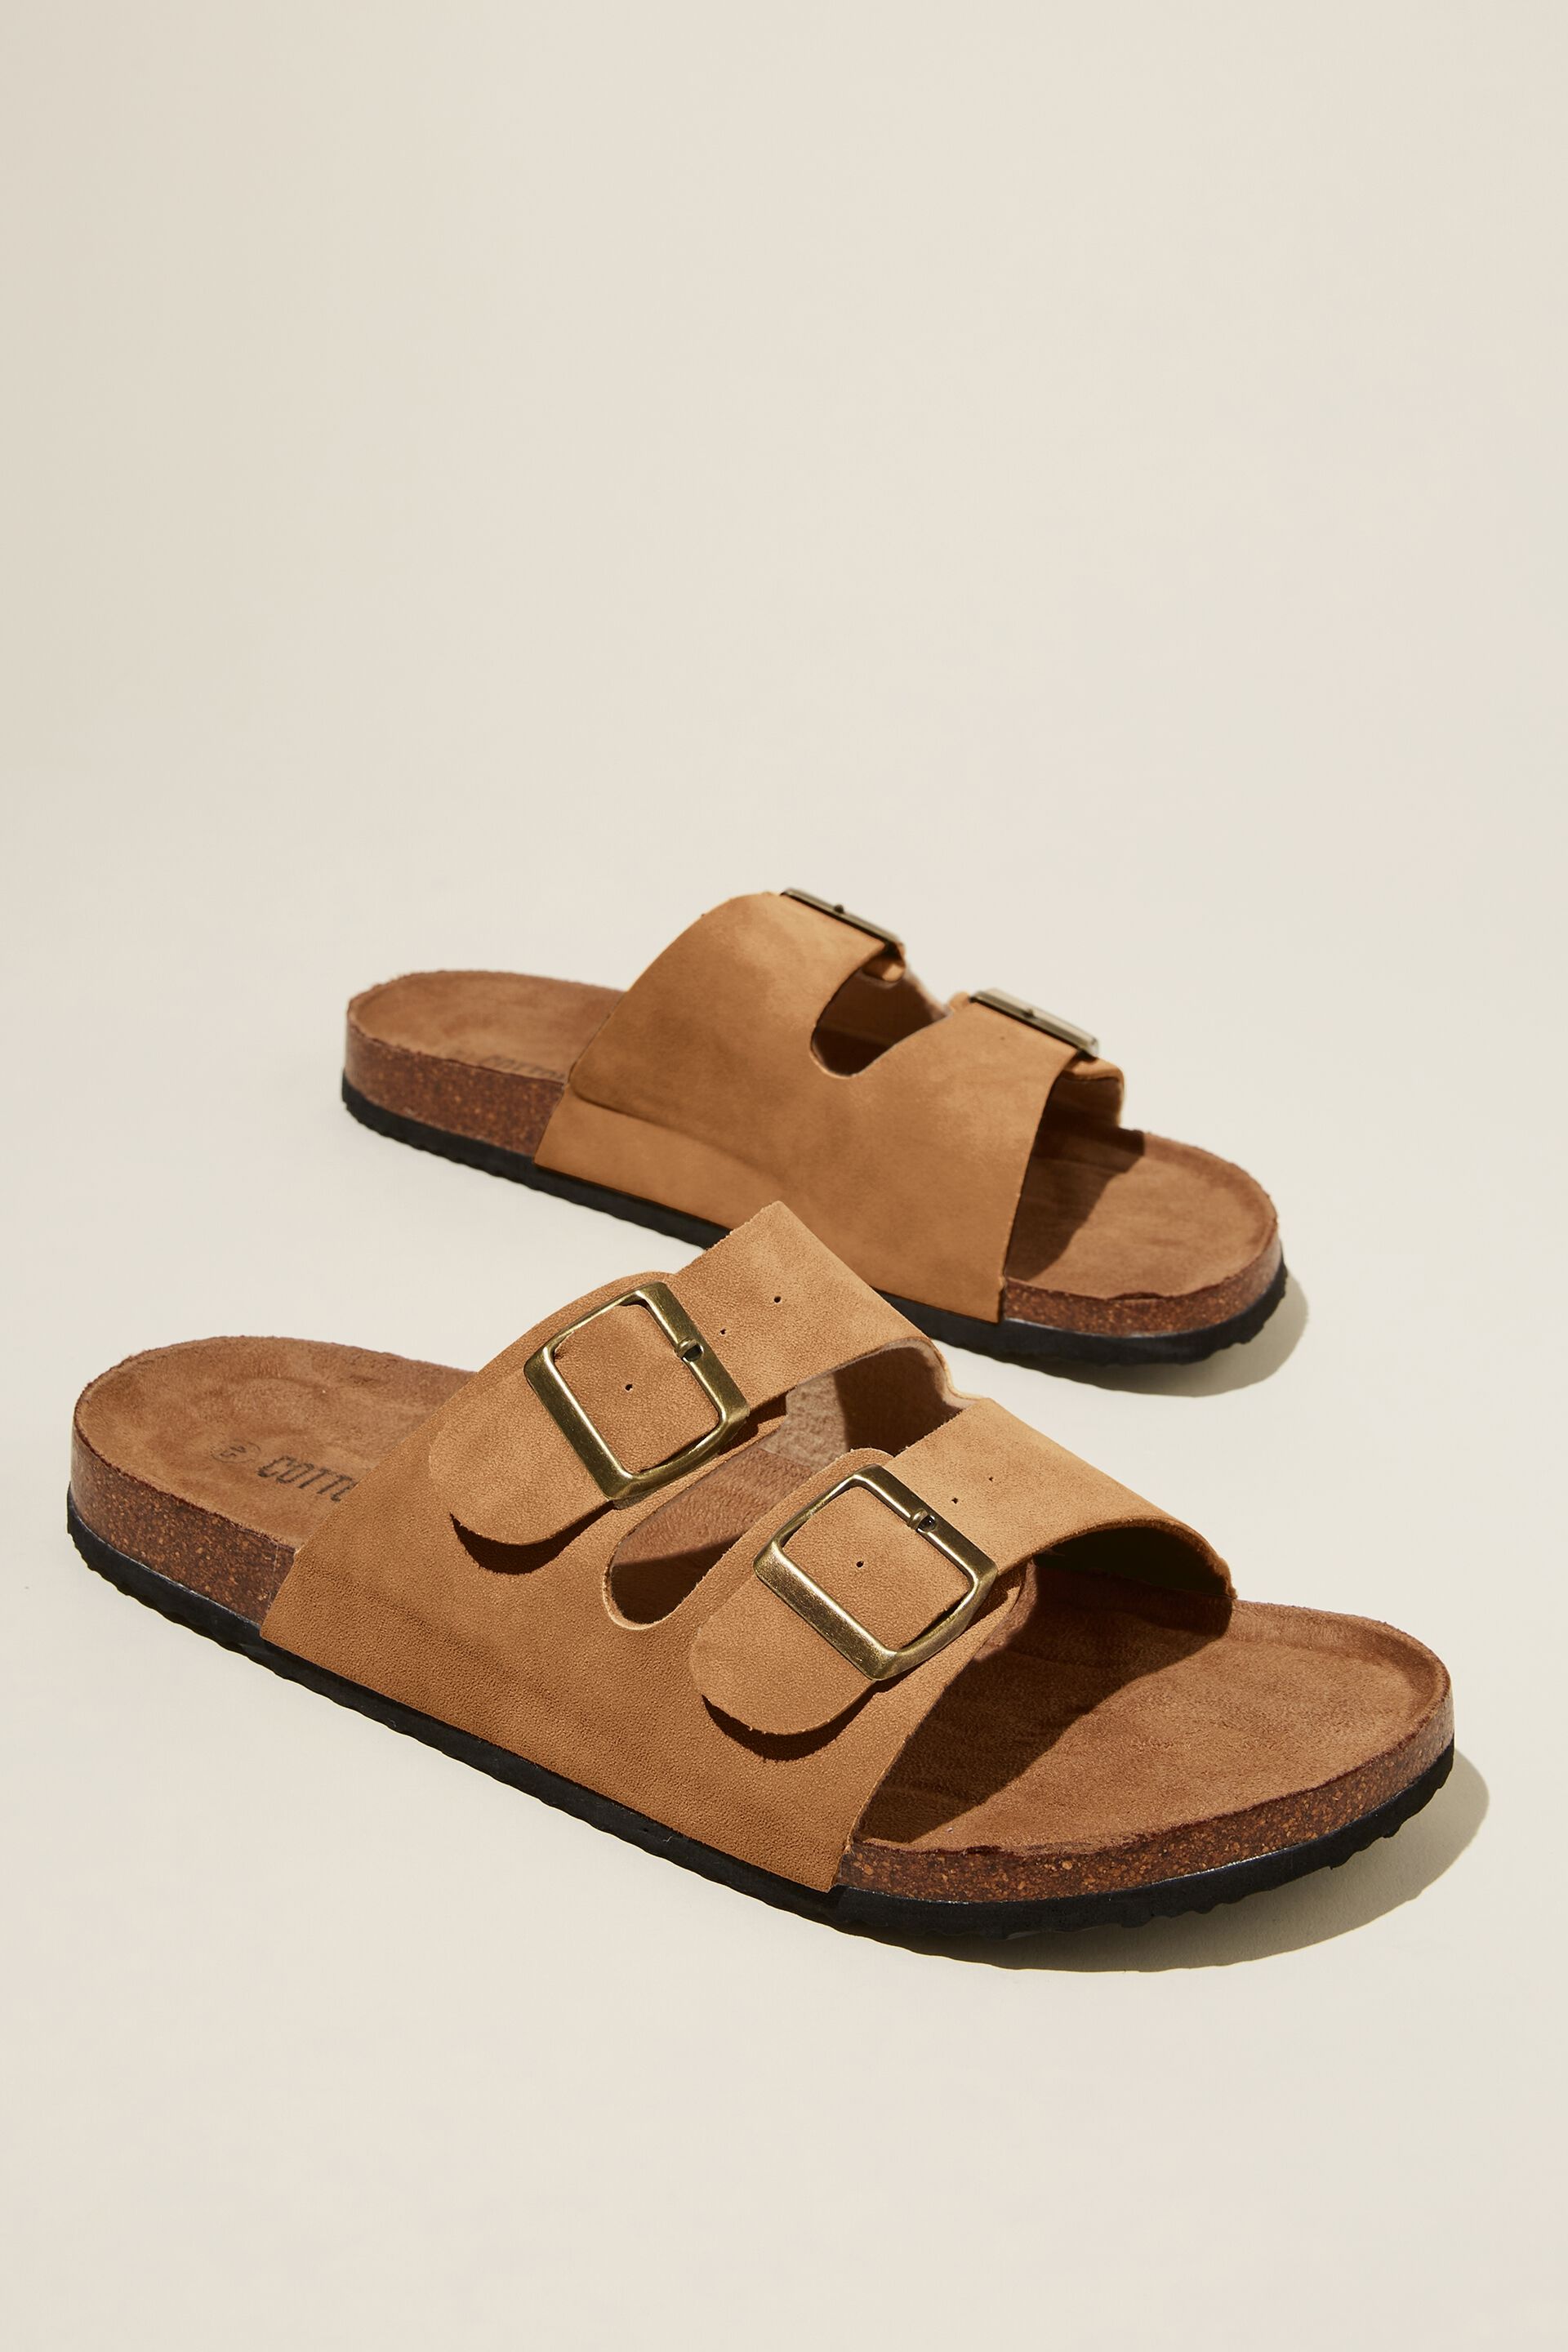 Red Tape wide fit double buckle slider sandals in brown leather  ASOS